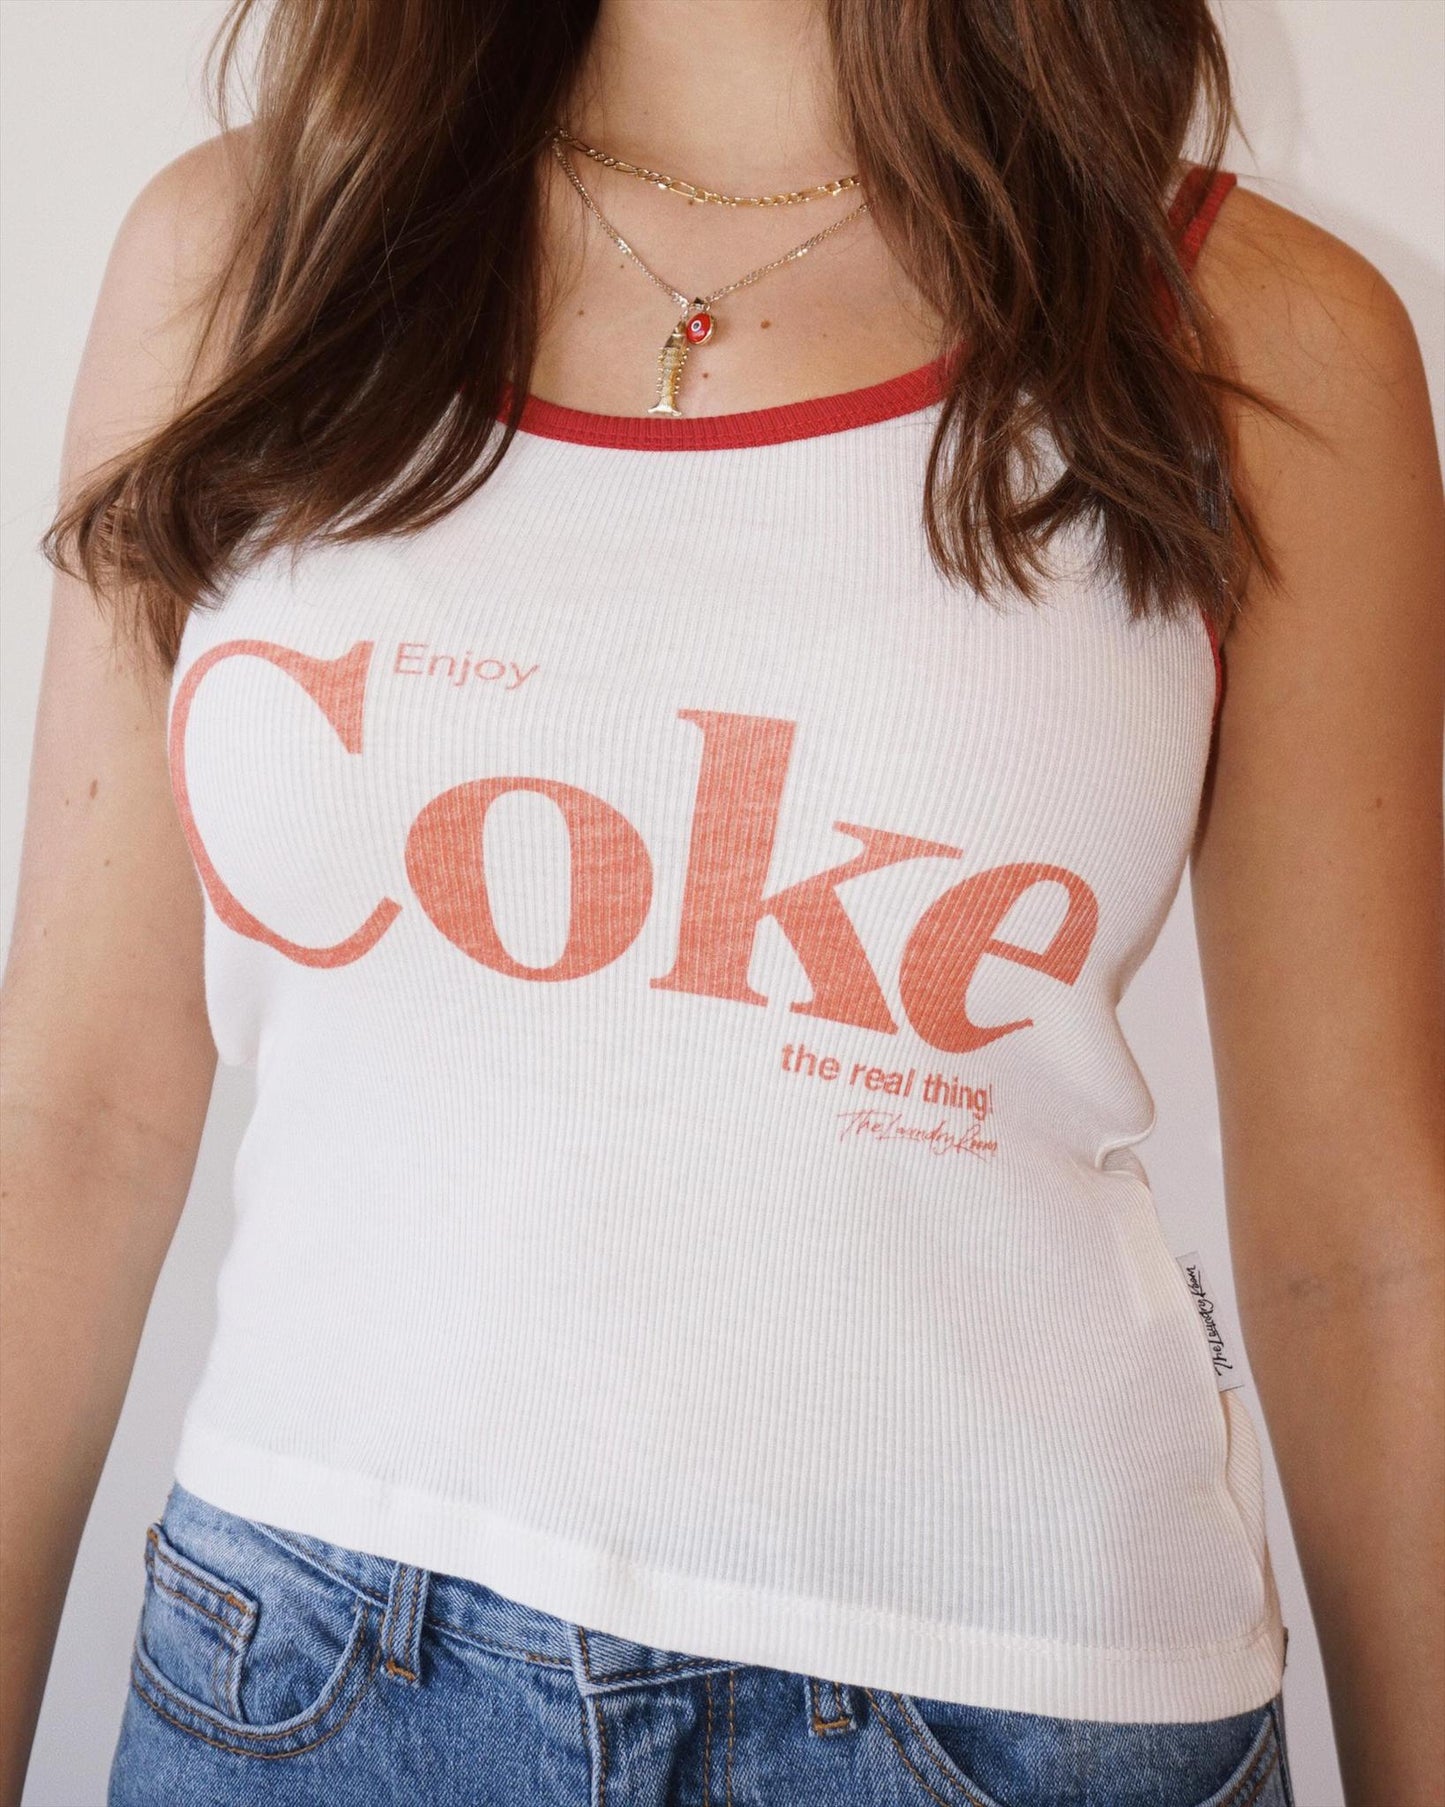 The Laundry Room Coke Cropped Ribbed Tank Top